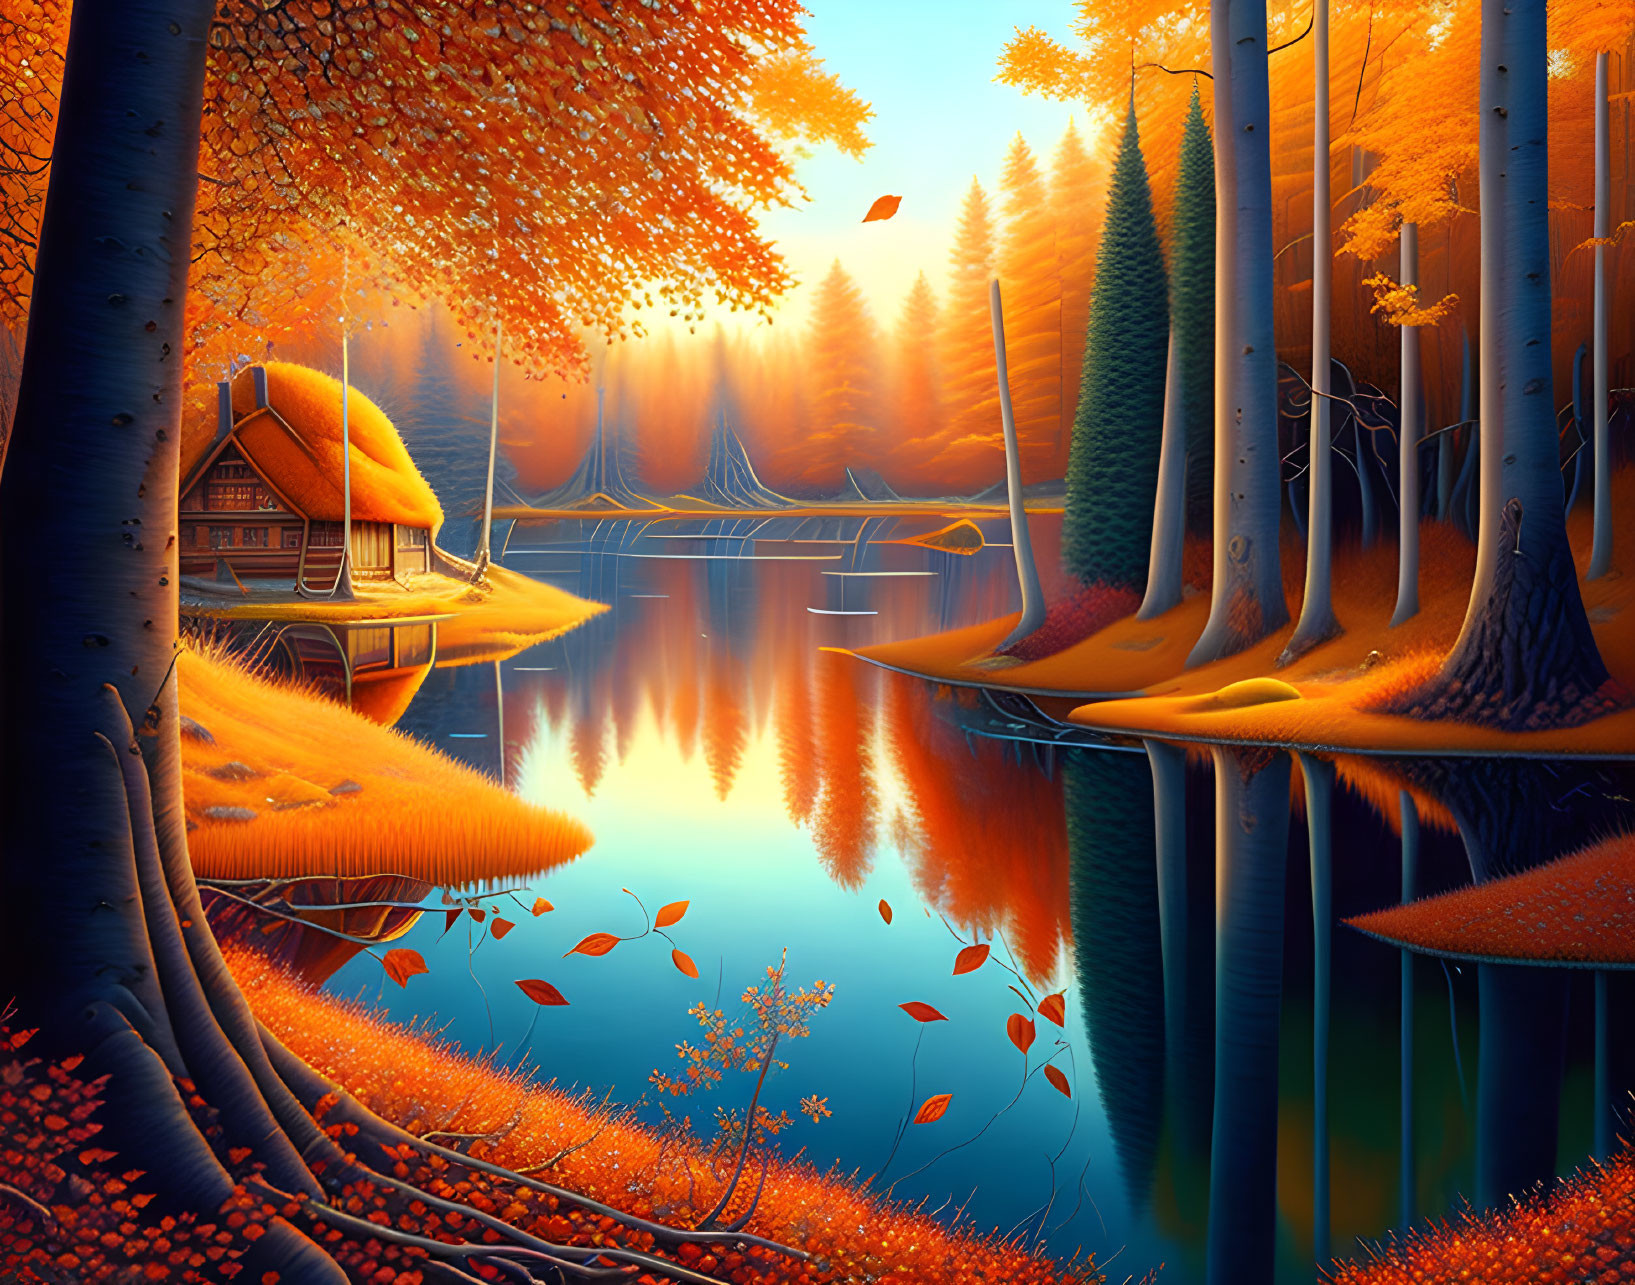 Tranquil autumn lake with orange trees and cozy cabin